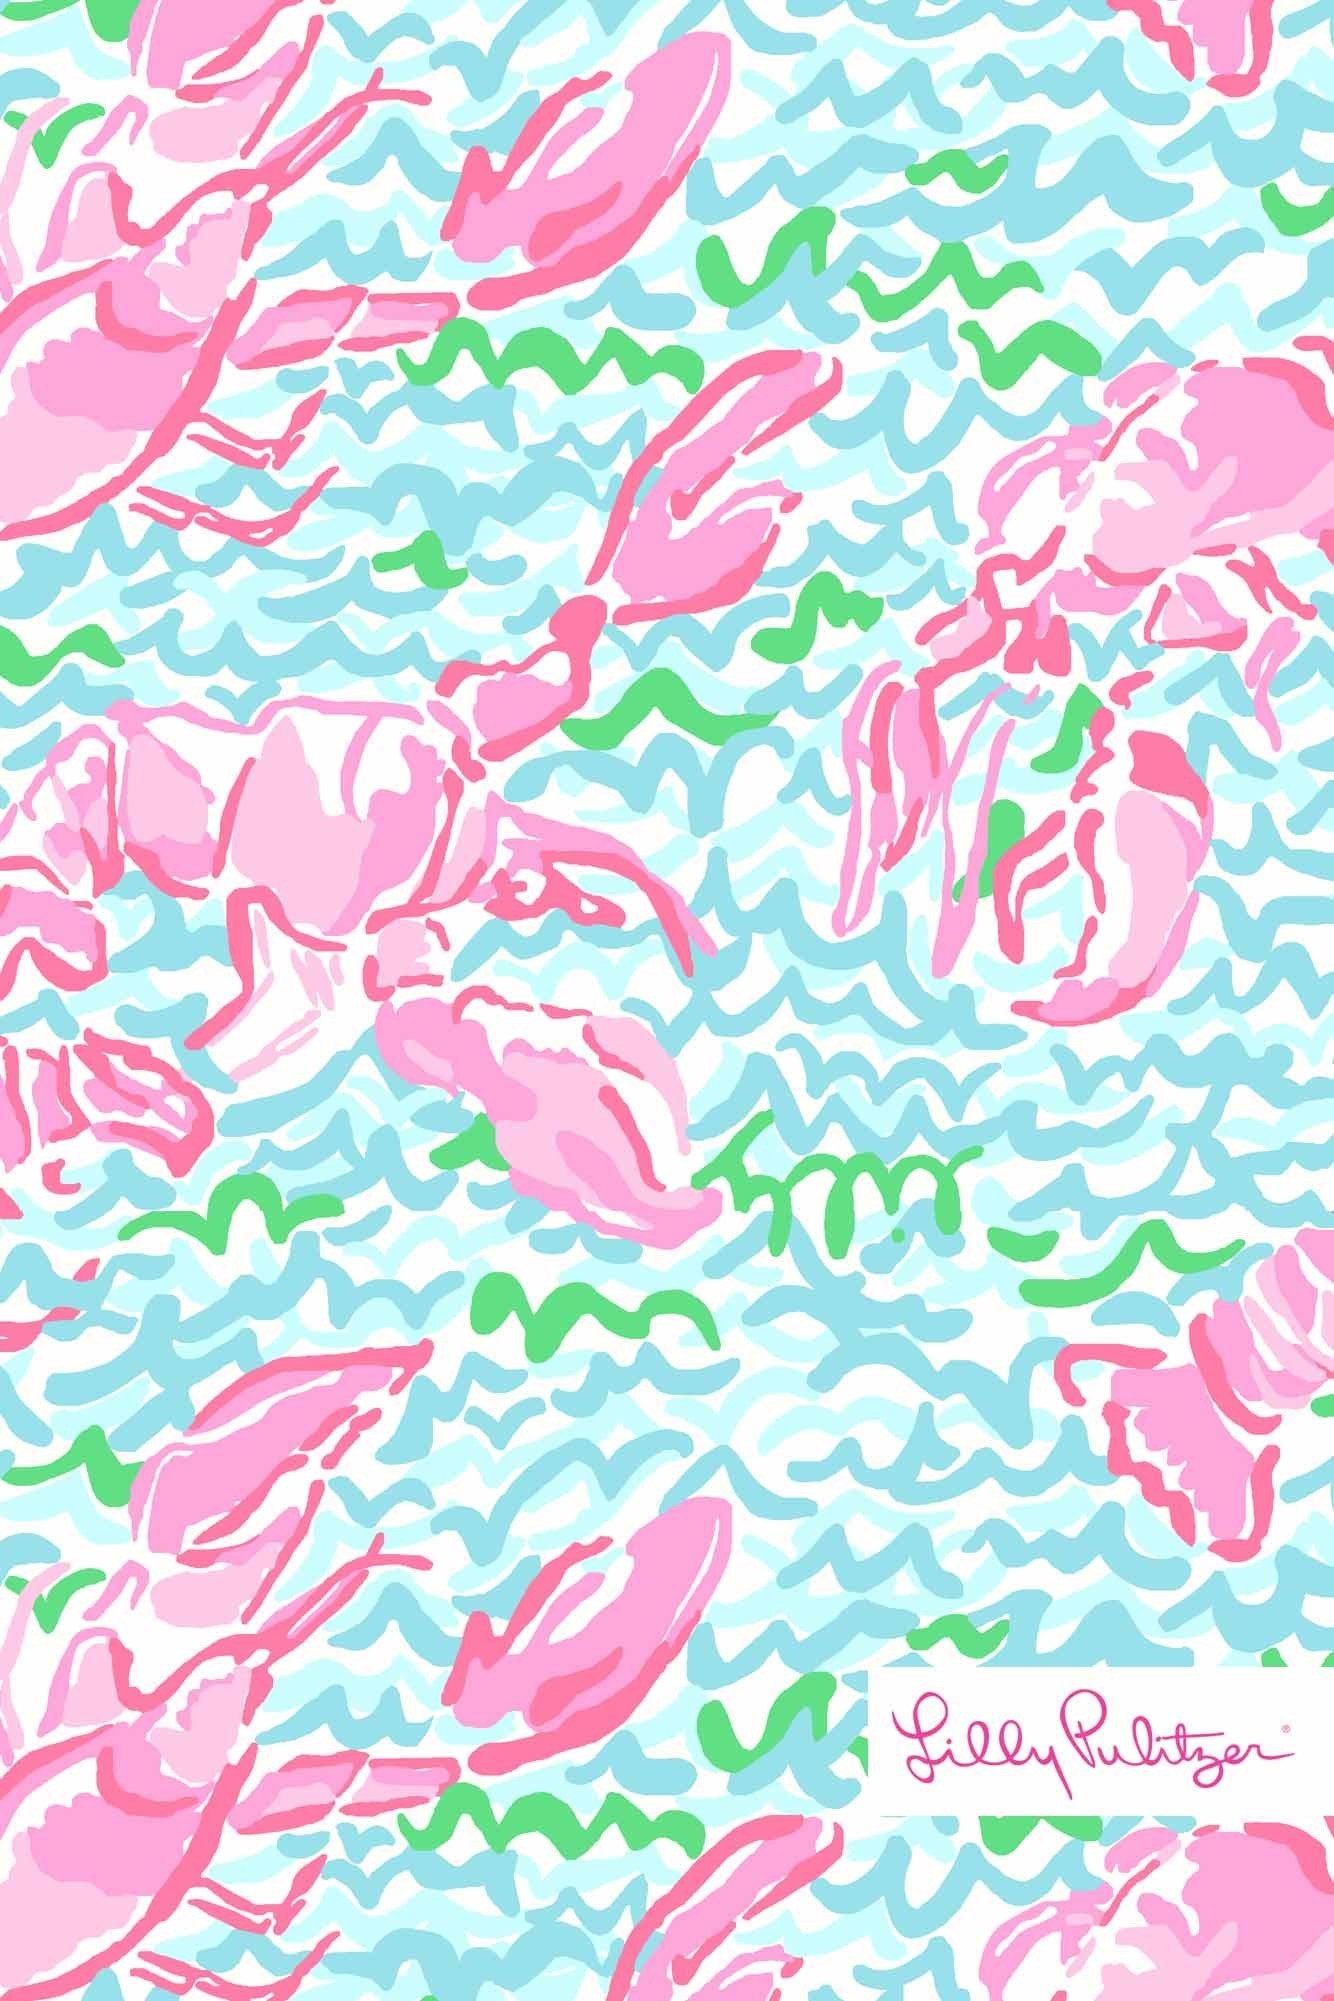 1334x2001 Simply southern wallpapers on wallpaperplay jpg  Alpha chi omega  lilly pulitzer wallpaper